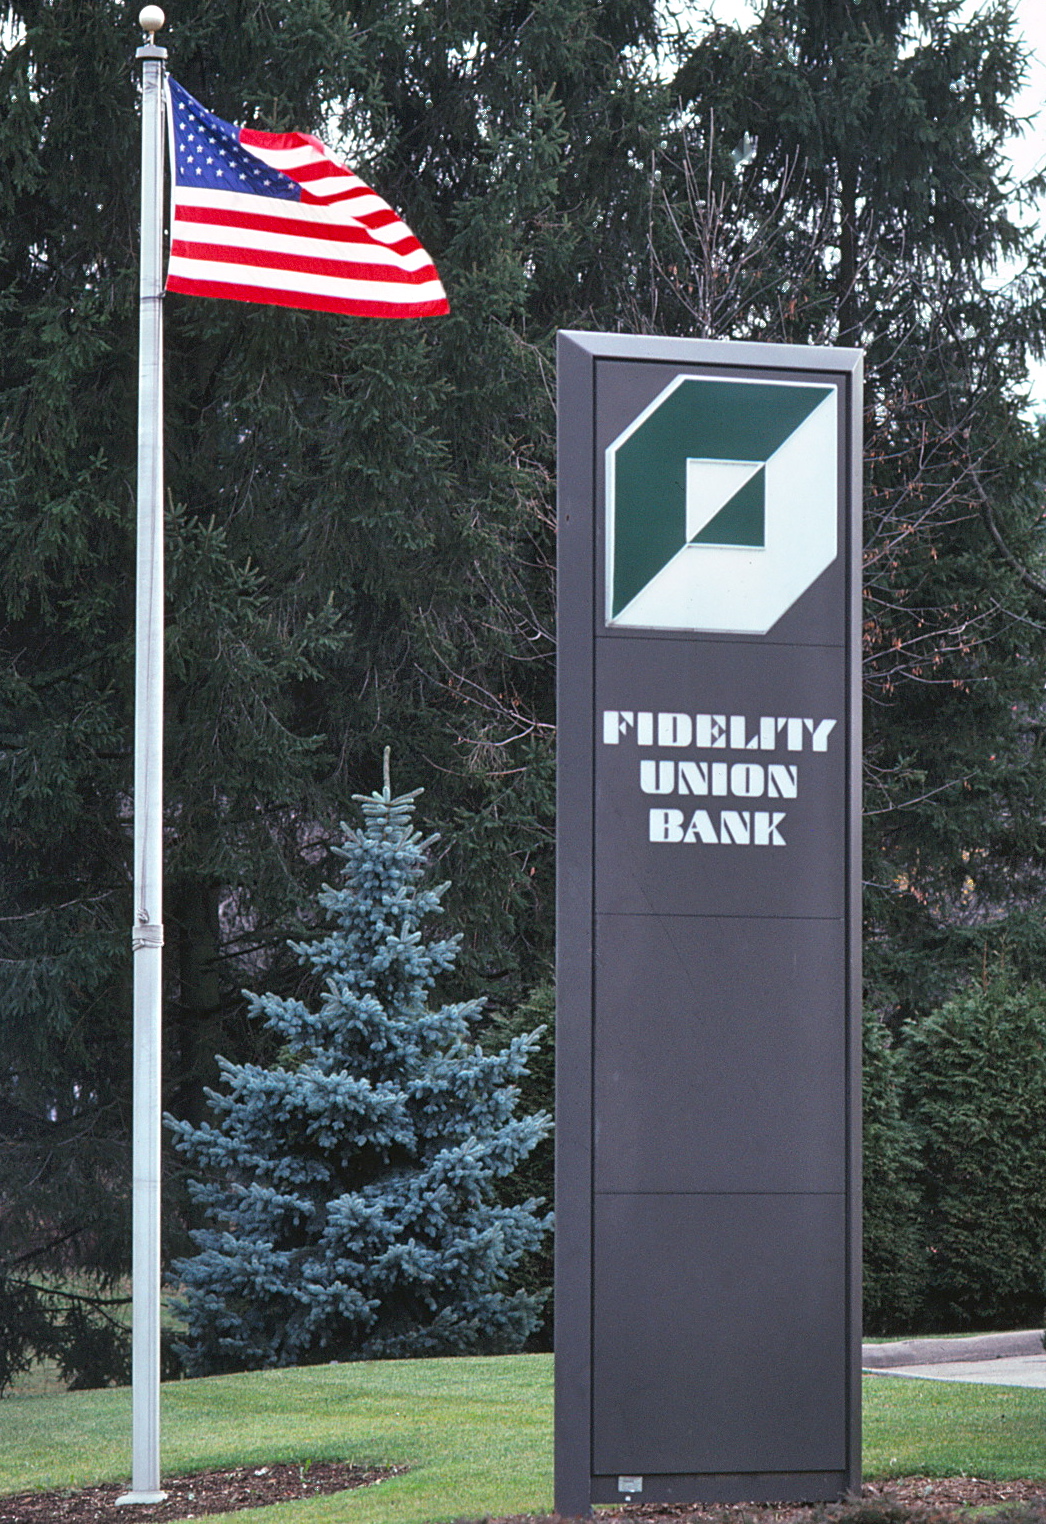 Outdoor photo of a tall pylon with Fidelity logo and typeface next to a fluttering US flag.